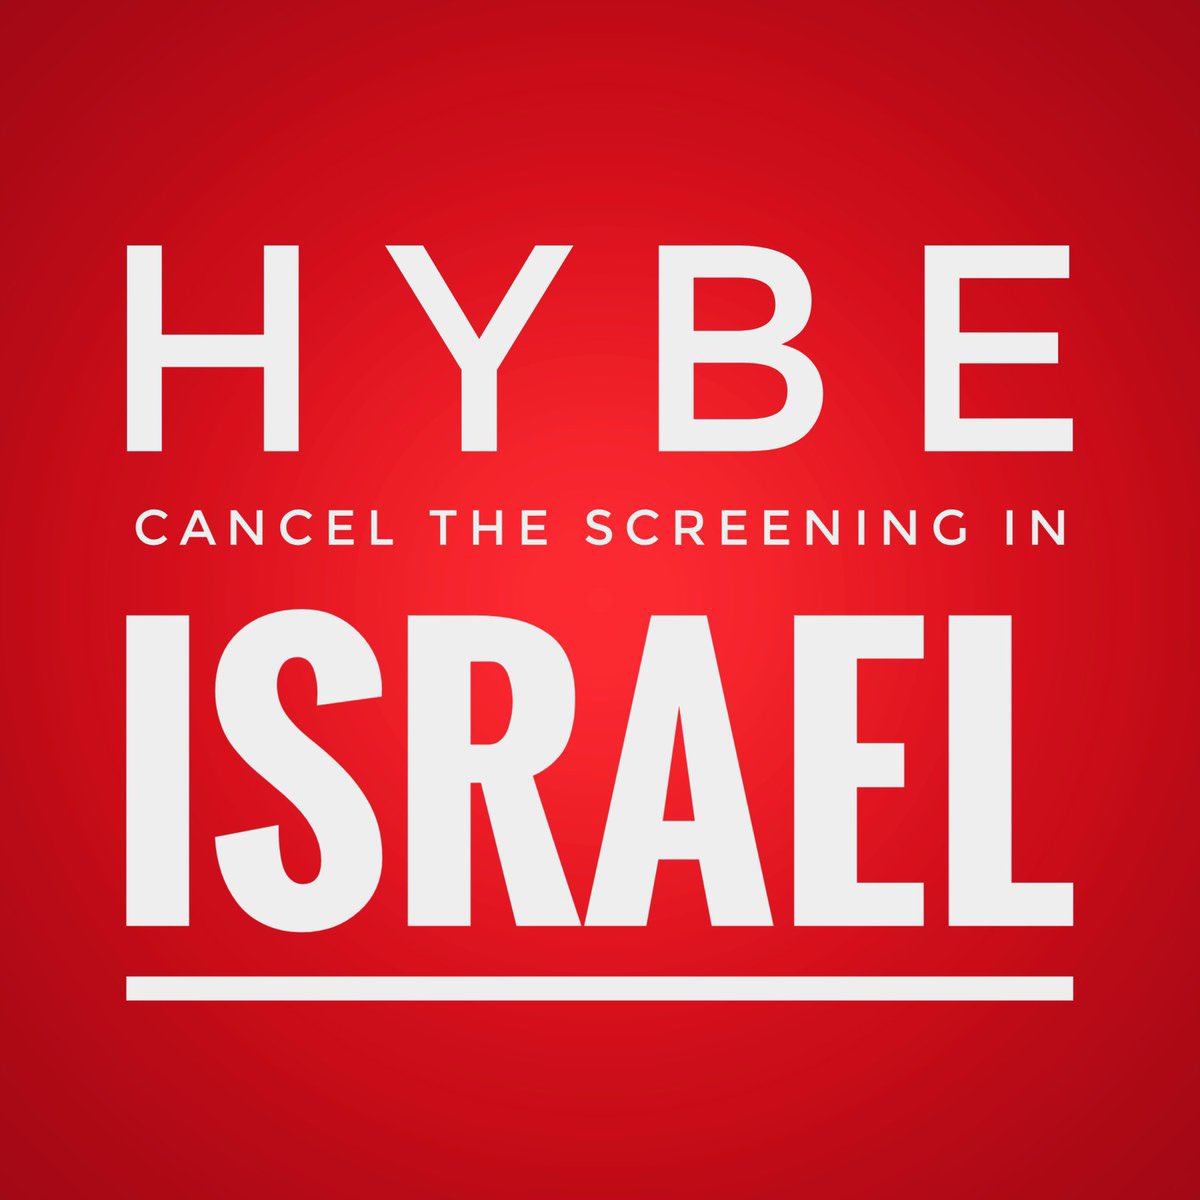 we urge you to cancel the screening in israel. showing the movie in israel directly contradicts the BDS movement and contributes to art washing. stand against ethnic cleansing and genocide.
@HYBEOFFICIALtwt
@TrafalgarRel
#하이브는시오니스트를퇴출하라
#HybeDivestFromZionism